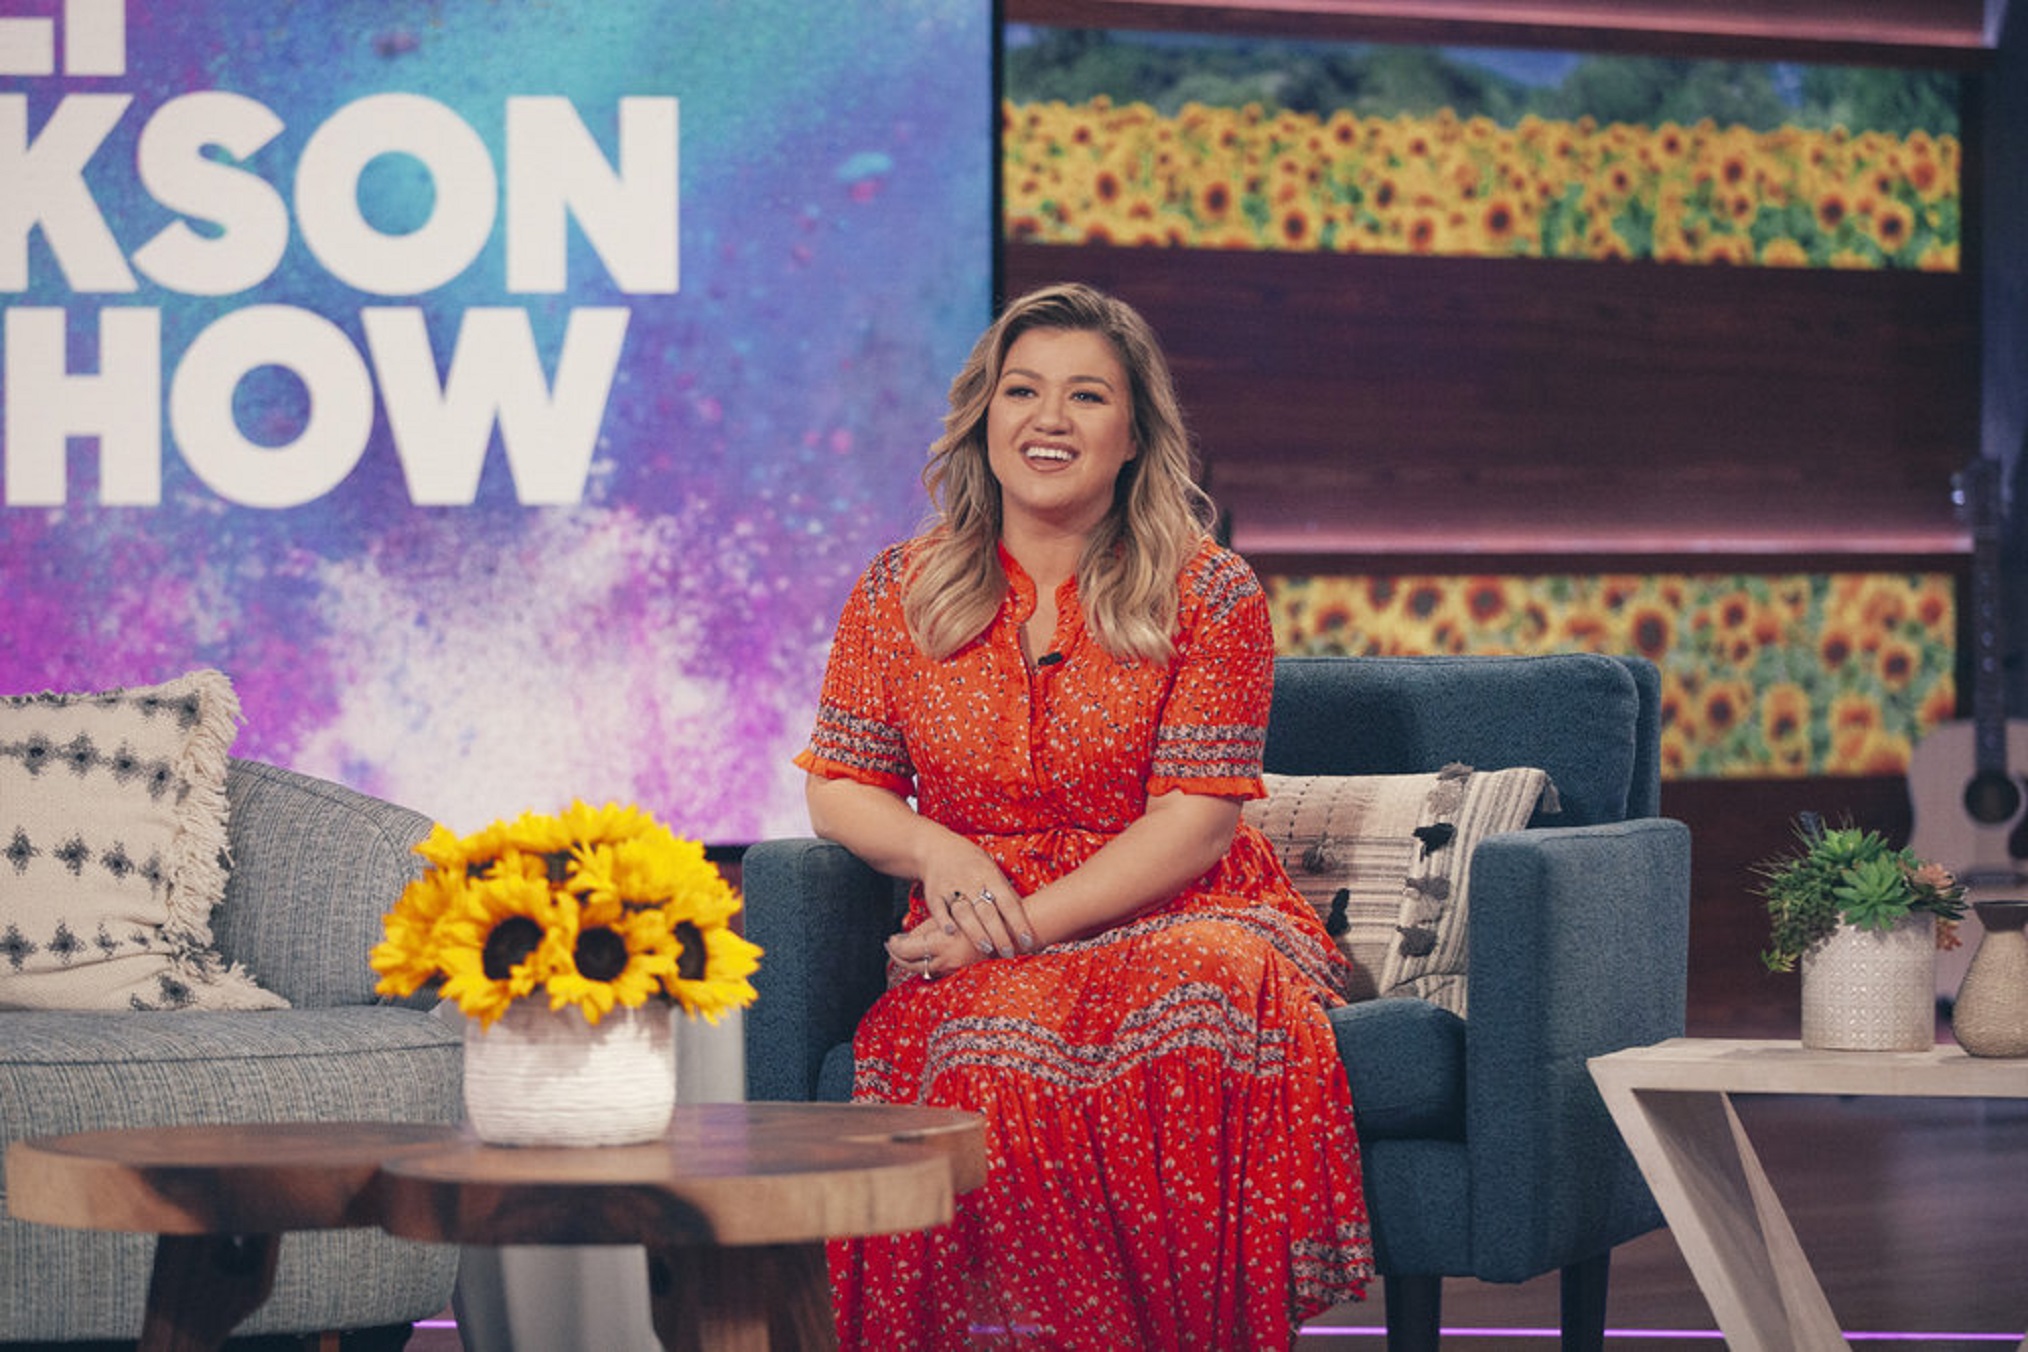 NBCUniversal Renews 'The Kelly Clarkson Show' Through 2023